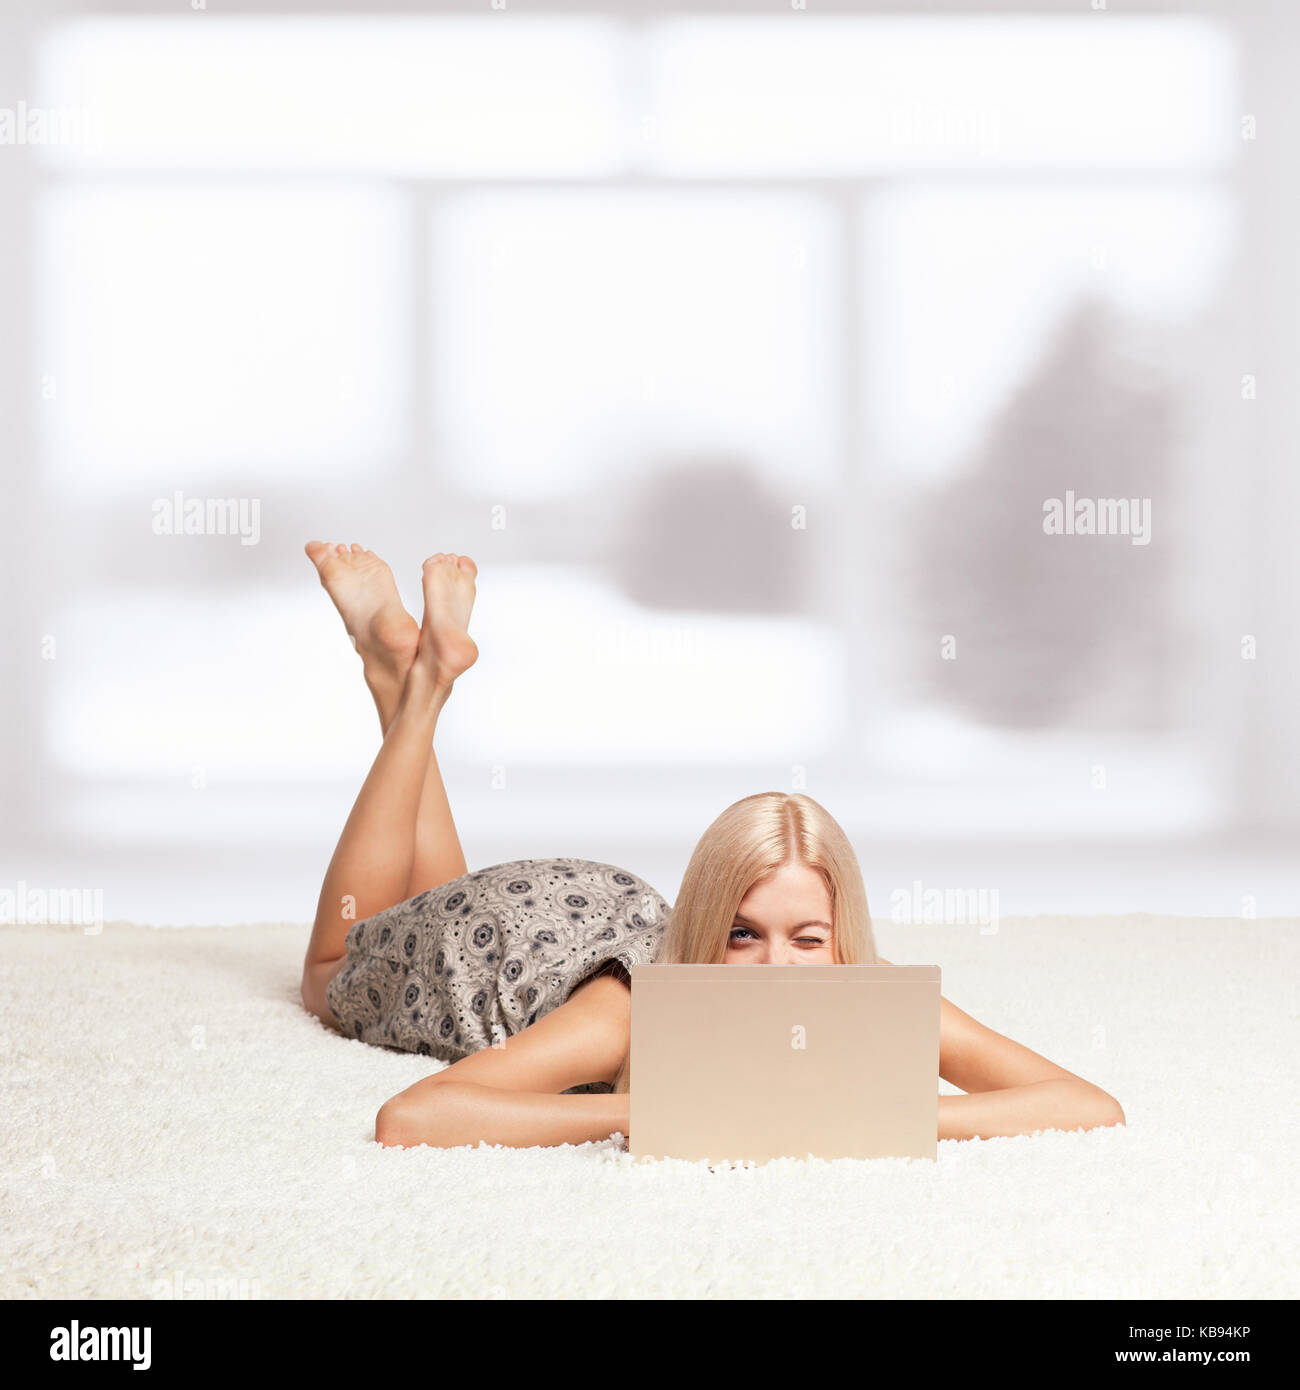 Winking blonde young woman on white whole-floor carpet browsing laptop  near window Stock Photo